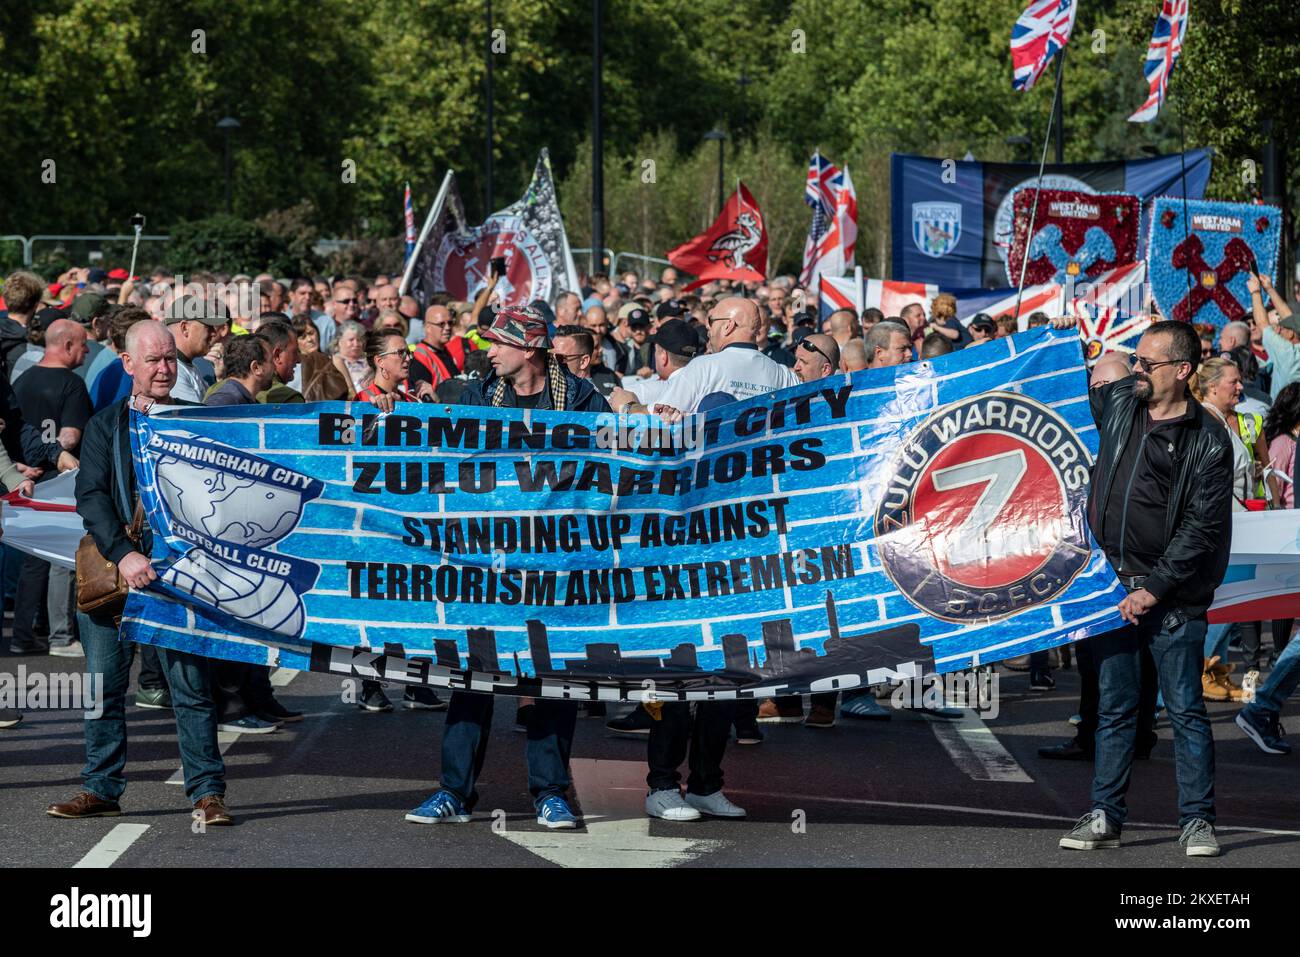 Birmingham City banner. Democratic Football Lads Alliance, DFLA, marched towards Parliament, London, UK, in a protest demonstration against terrorism Stock Photo